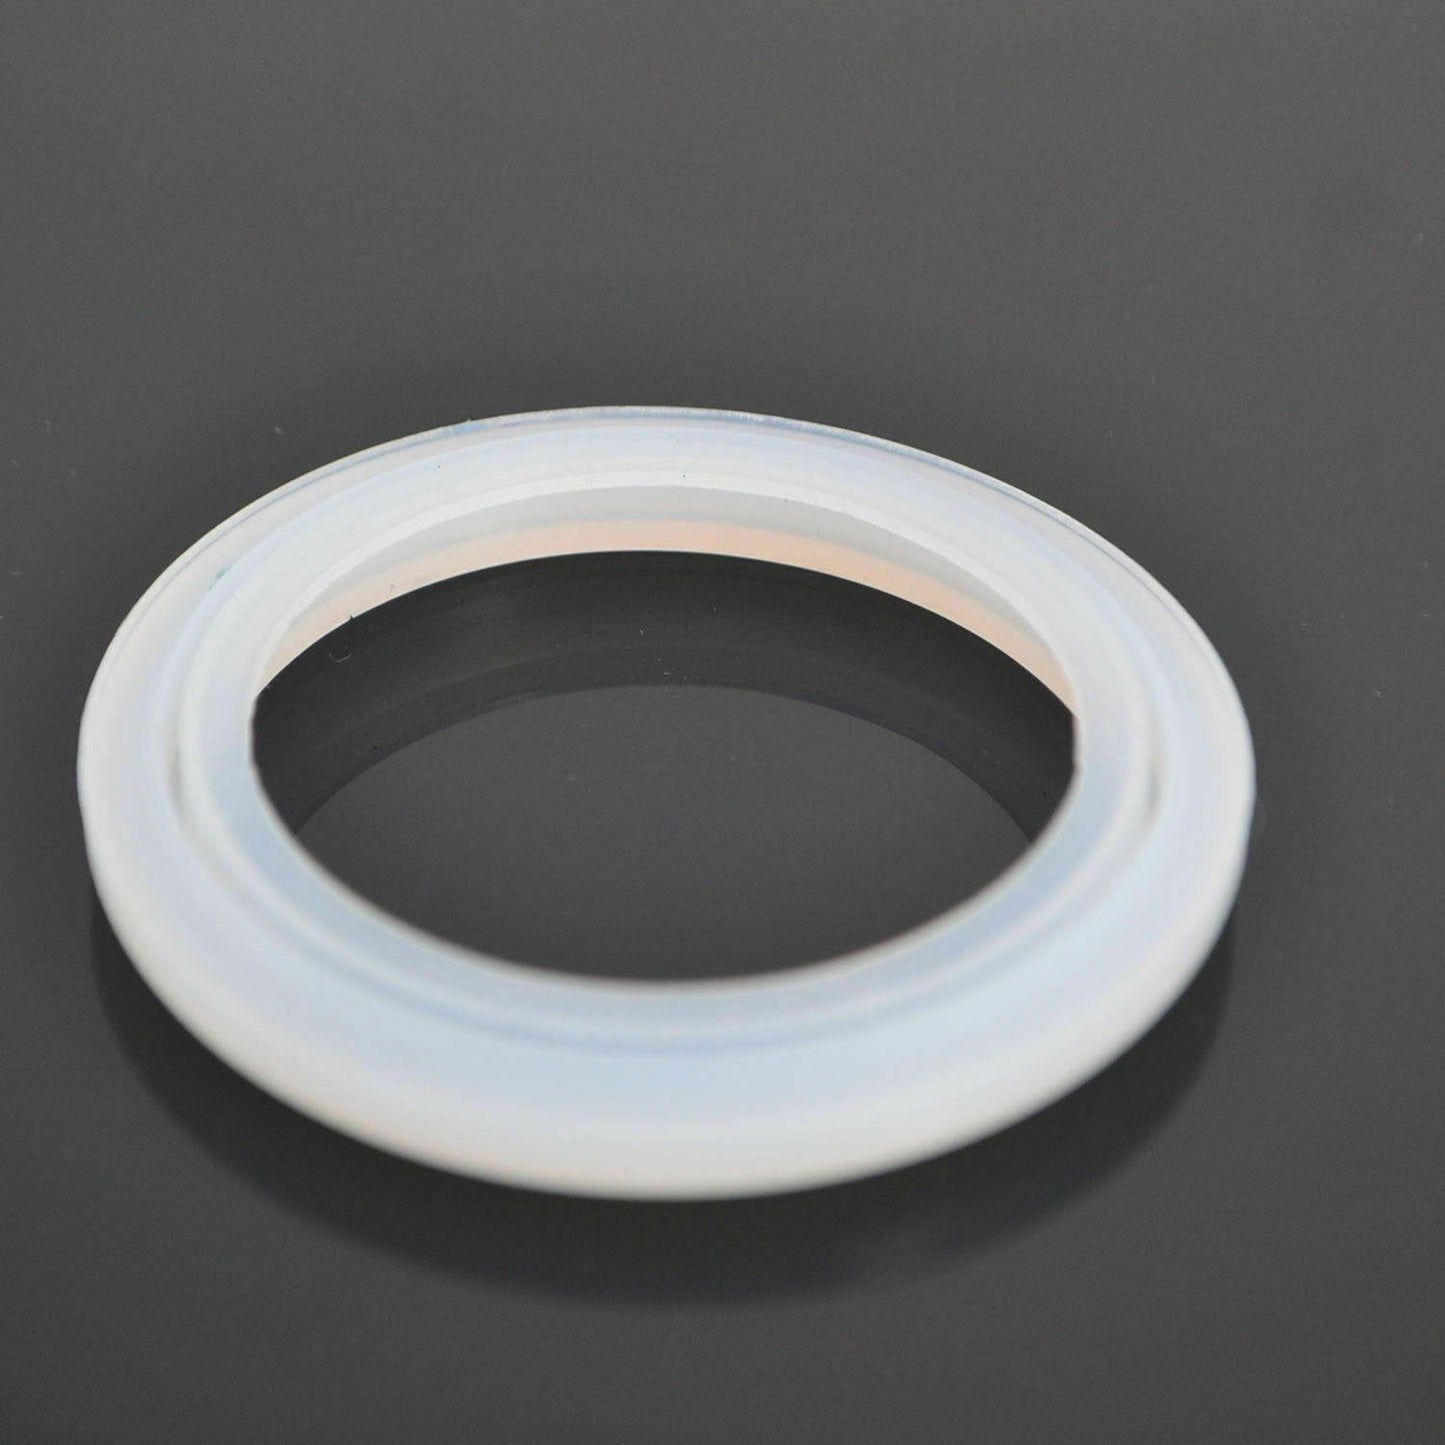 2X Coffee machine silicone seal For Krups Cafe XP4020 XP4030 XP5280 Sparesbarn